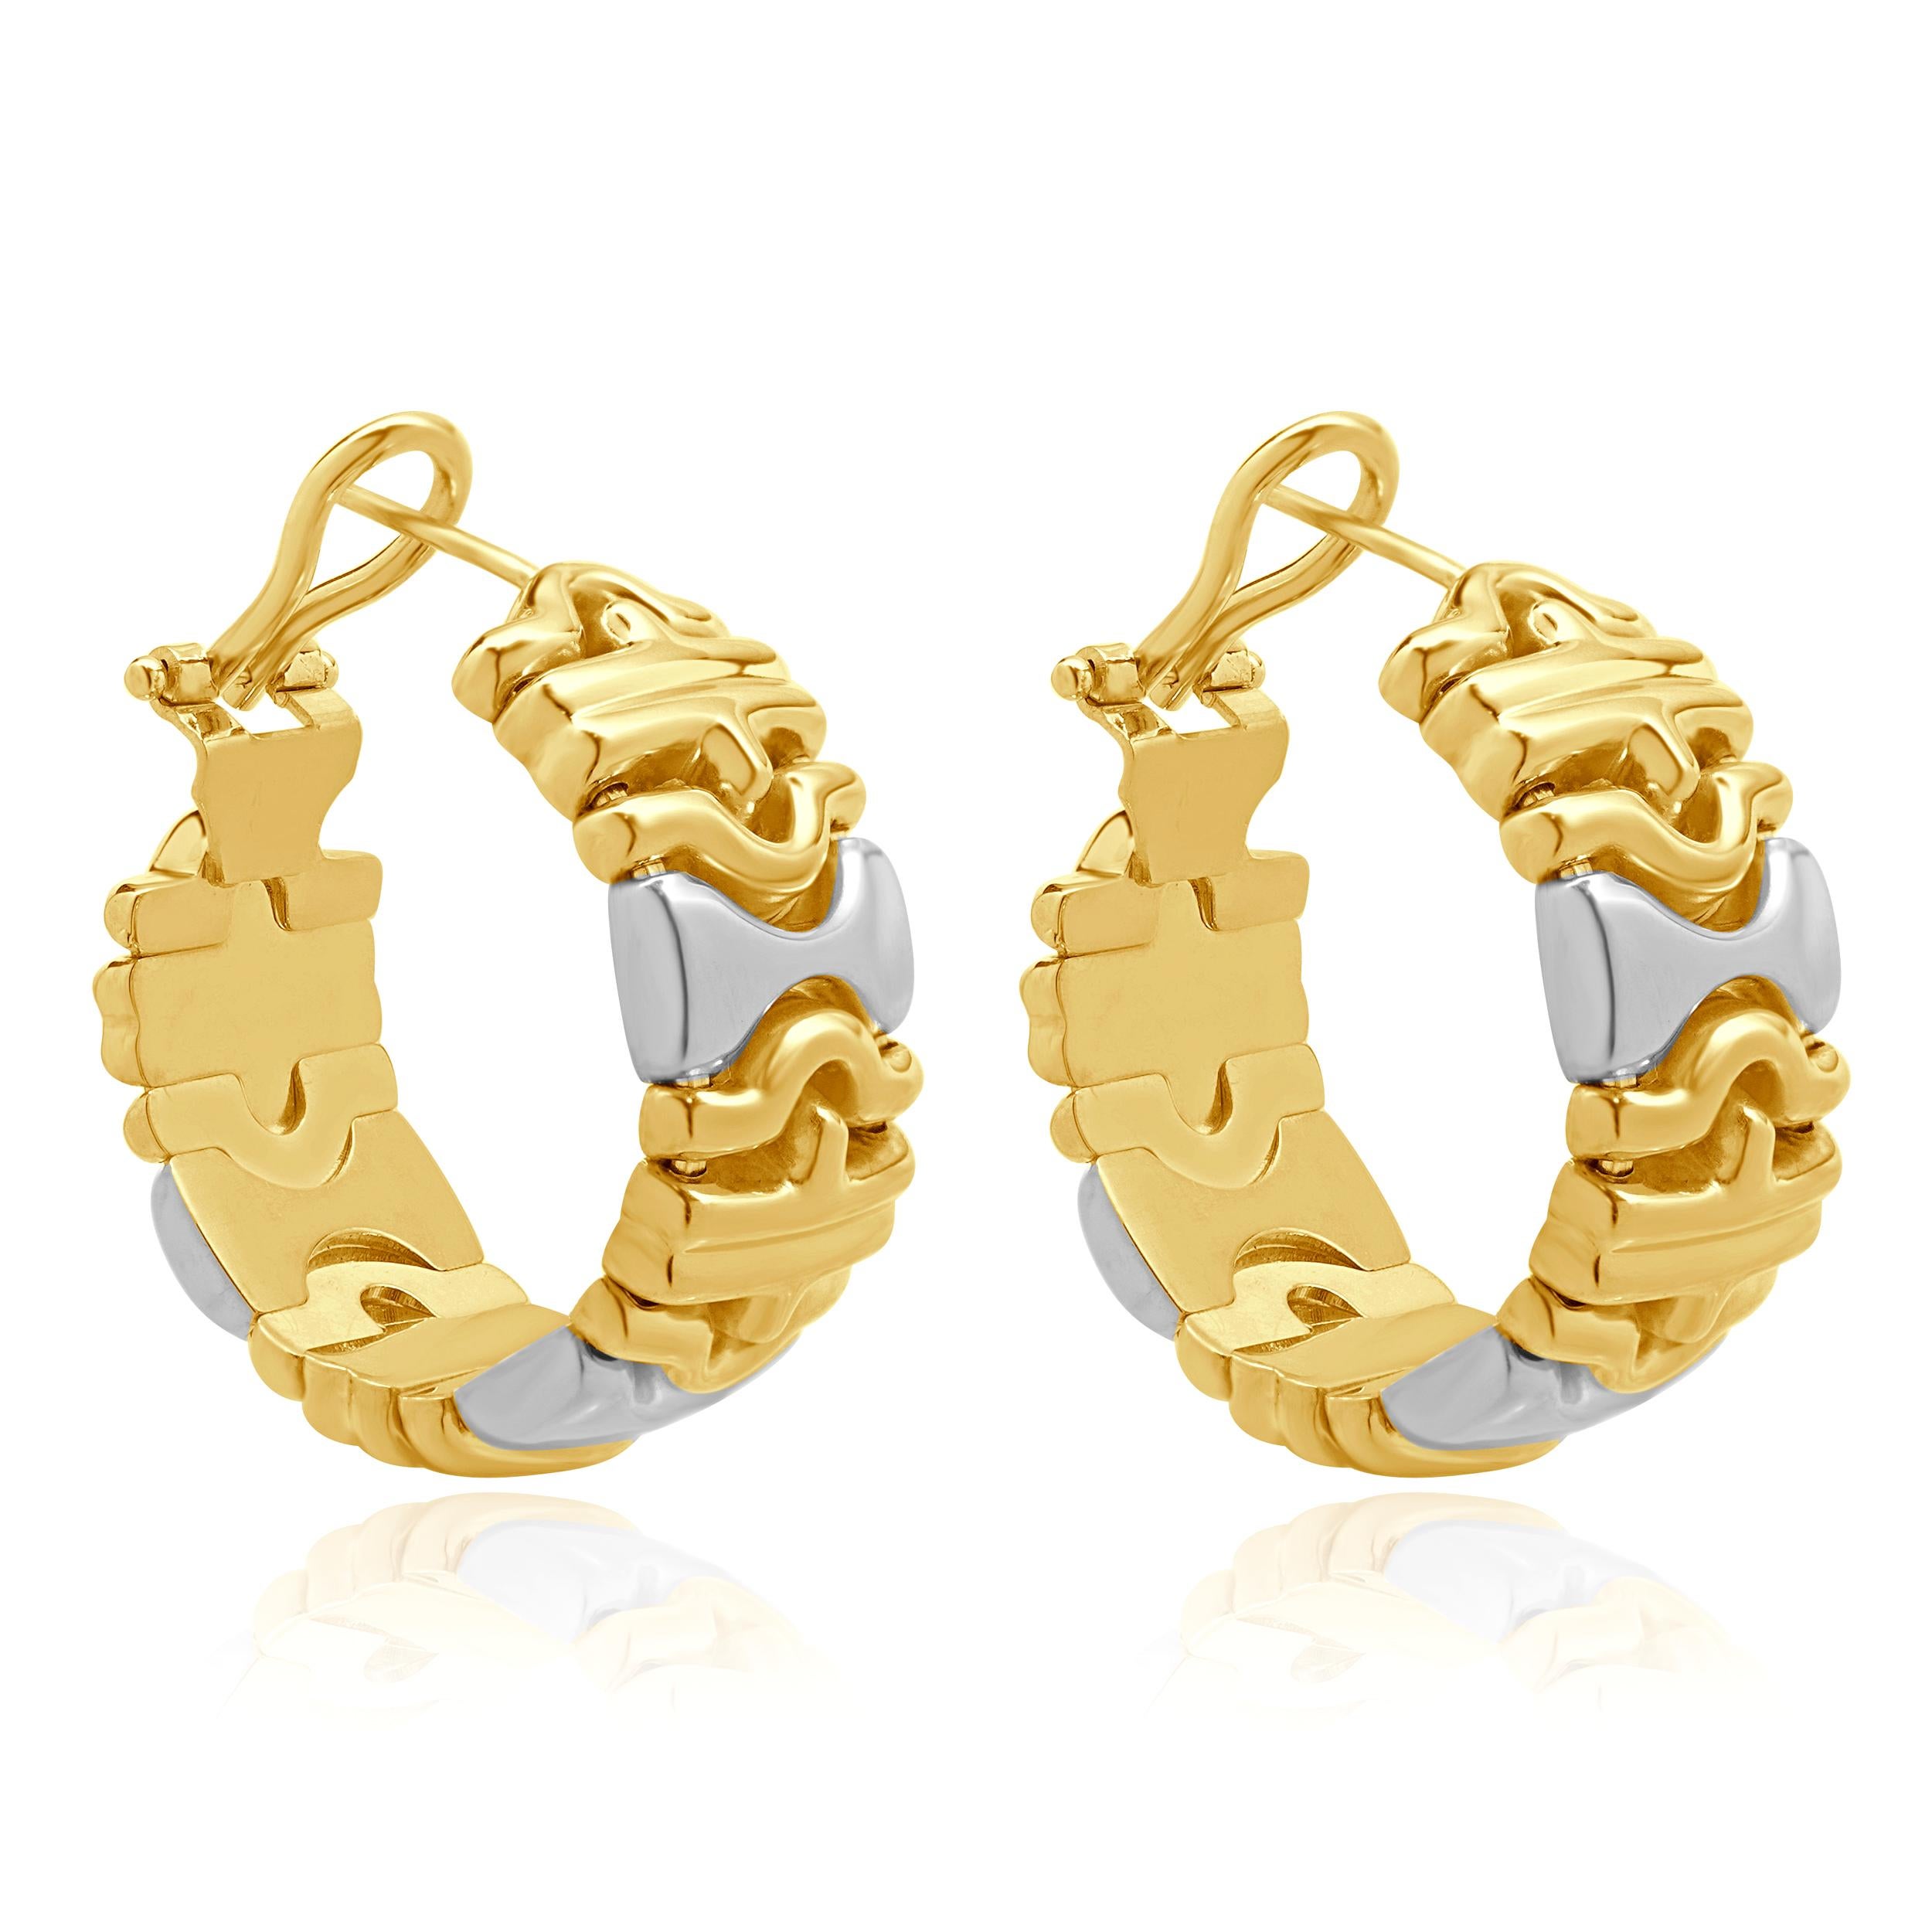 Material: 18K white & yellow gold
Dimensions: earrings measure 28mm
Weight:  20.15 grams
